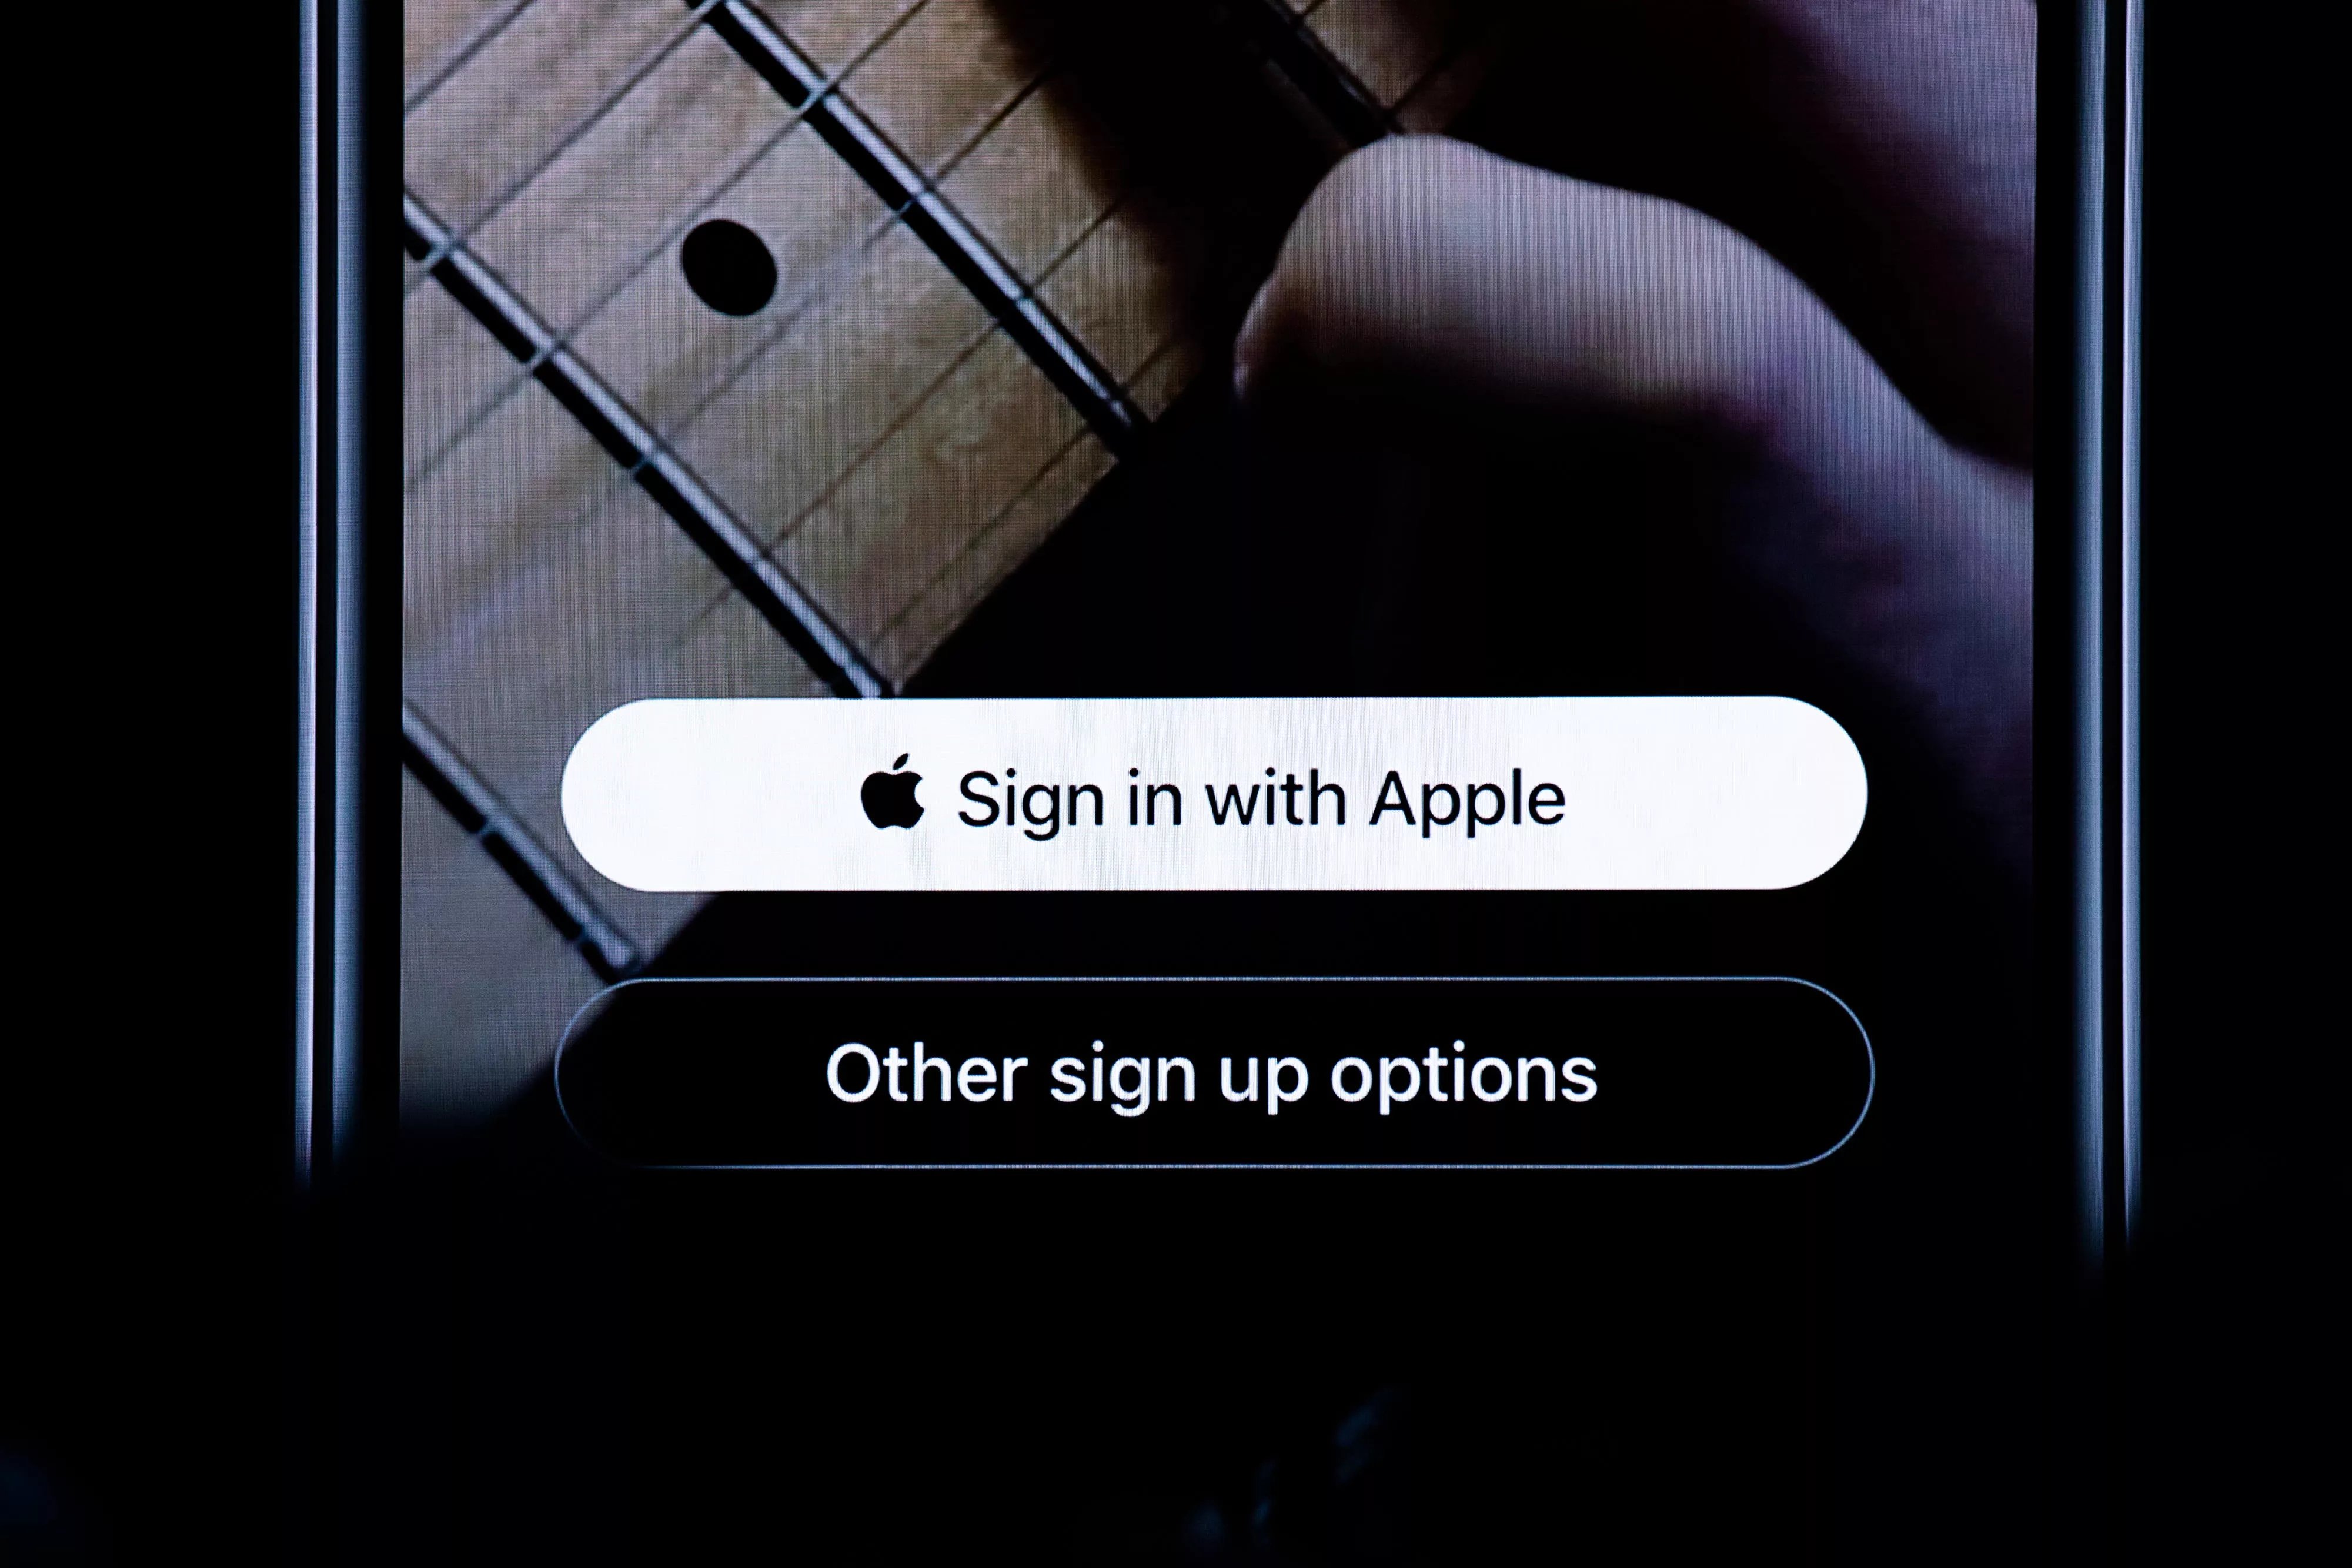 Sign in with apple